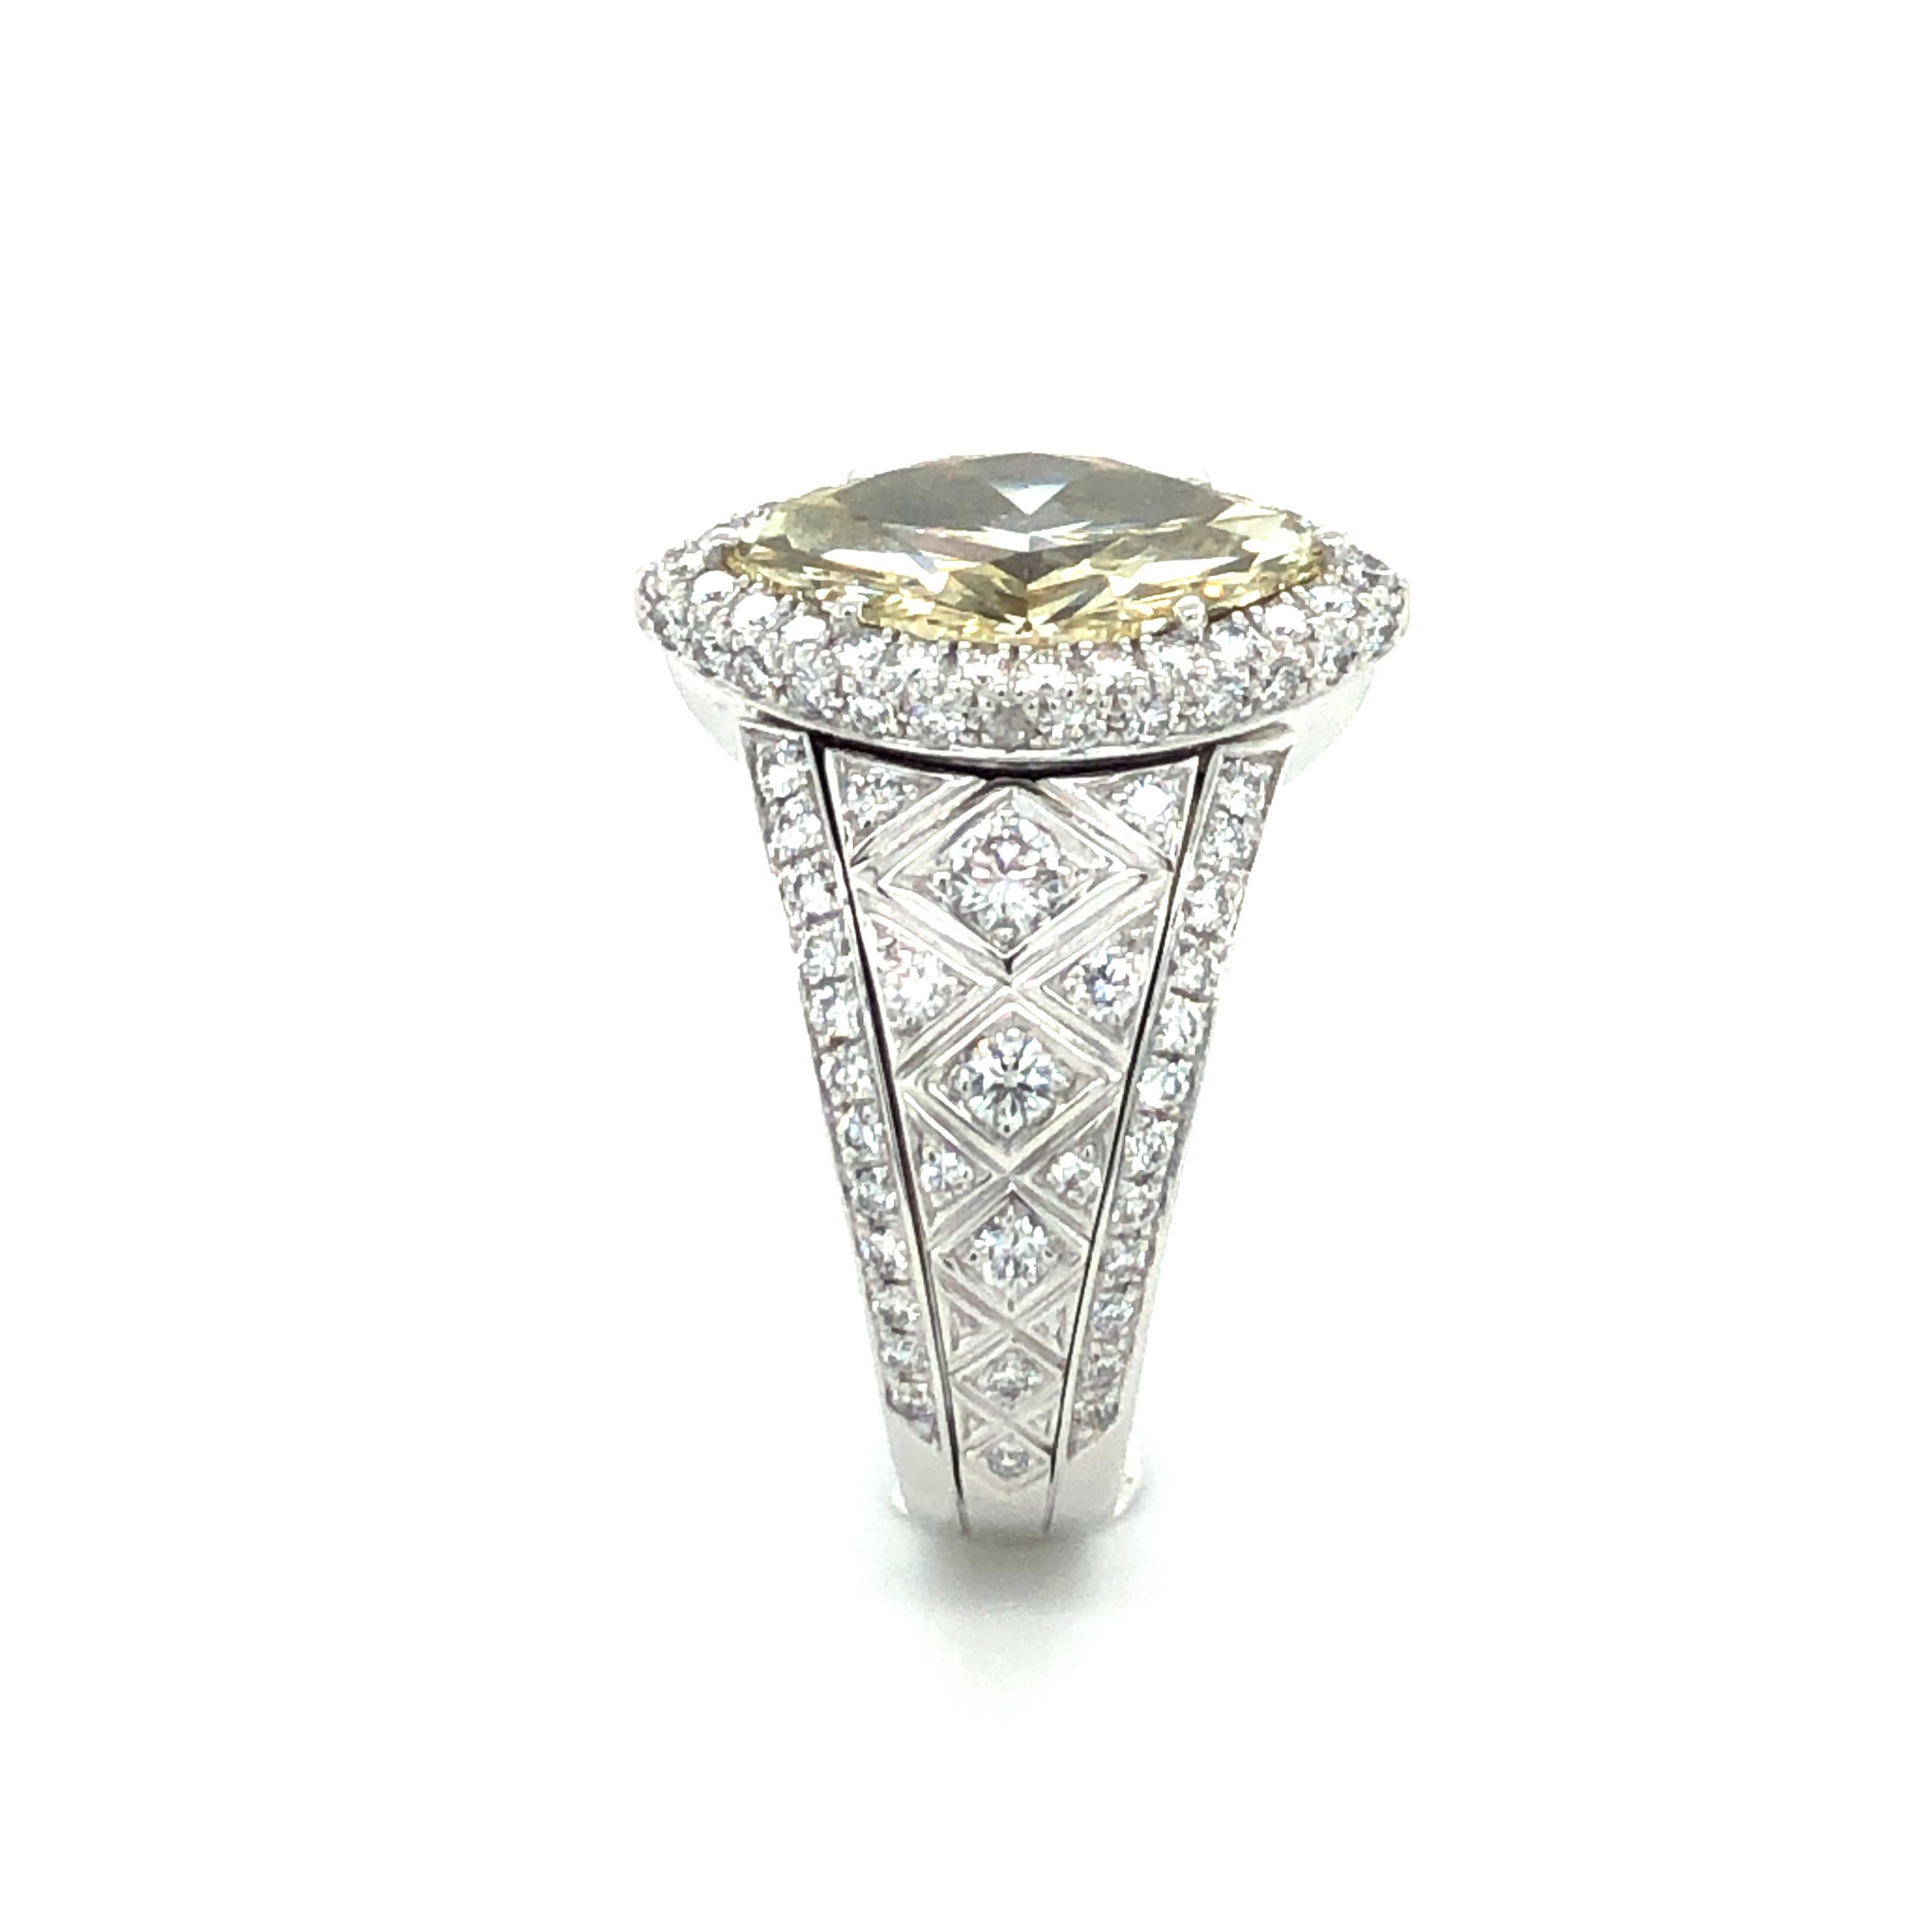 2.77 Carat Marquise-Cut Diamond Ring by Avalon Swiss in 18 Karat White Gold In Excellent Condition For Sale In Lucerne, CH